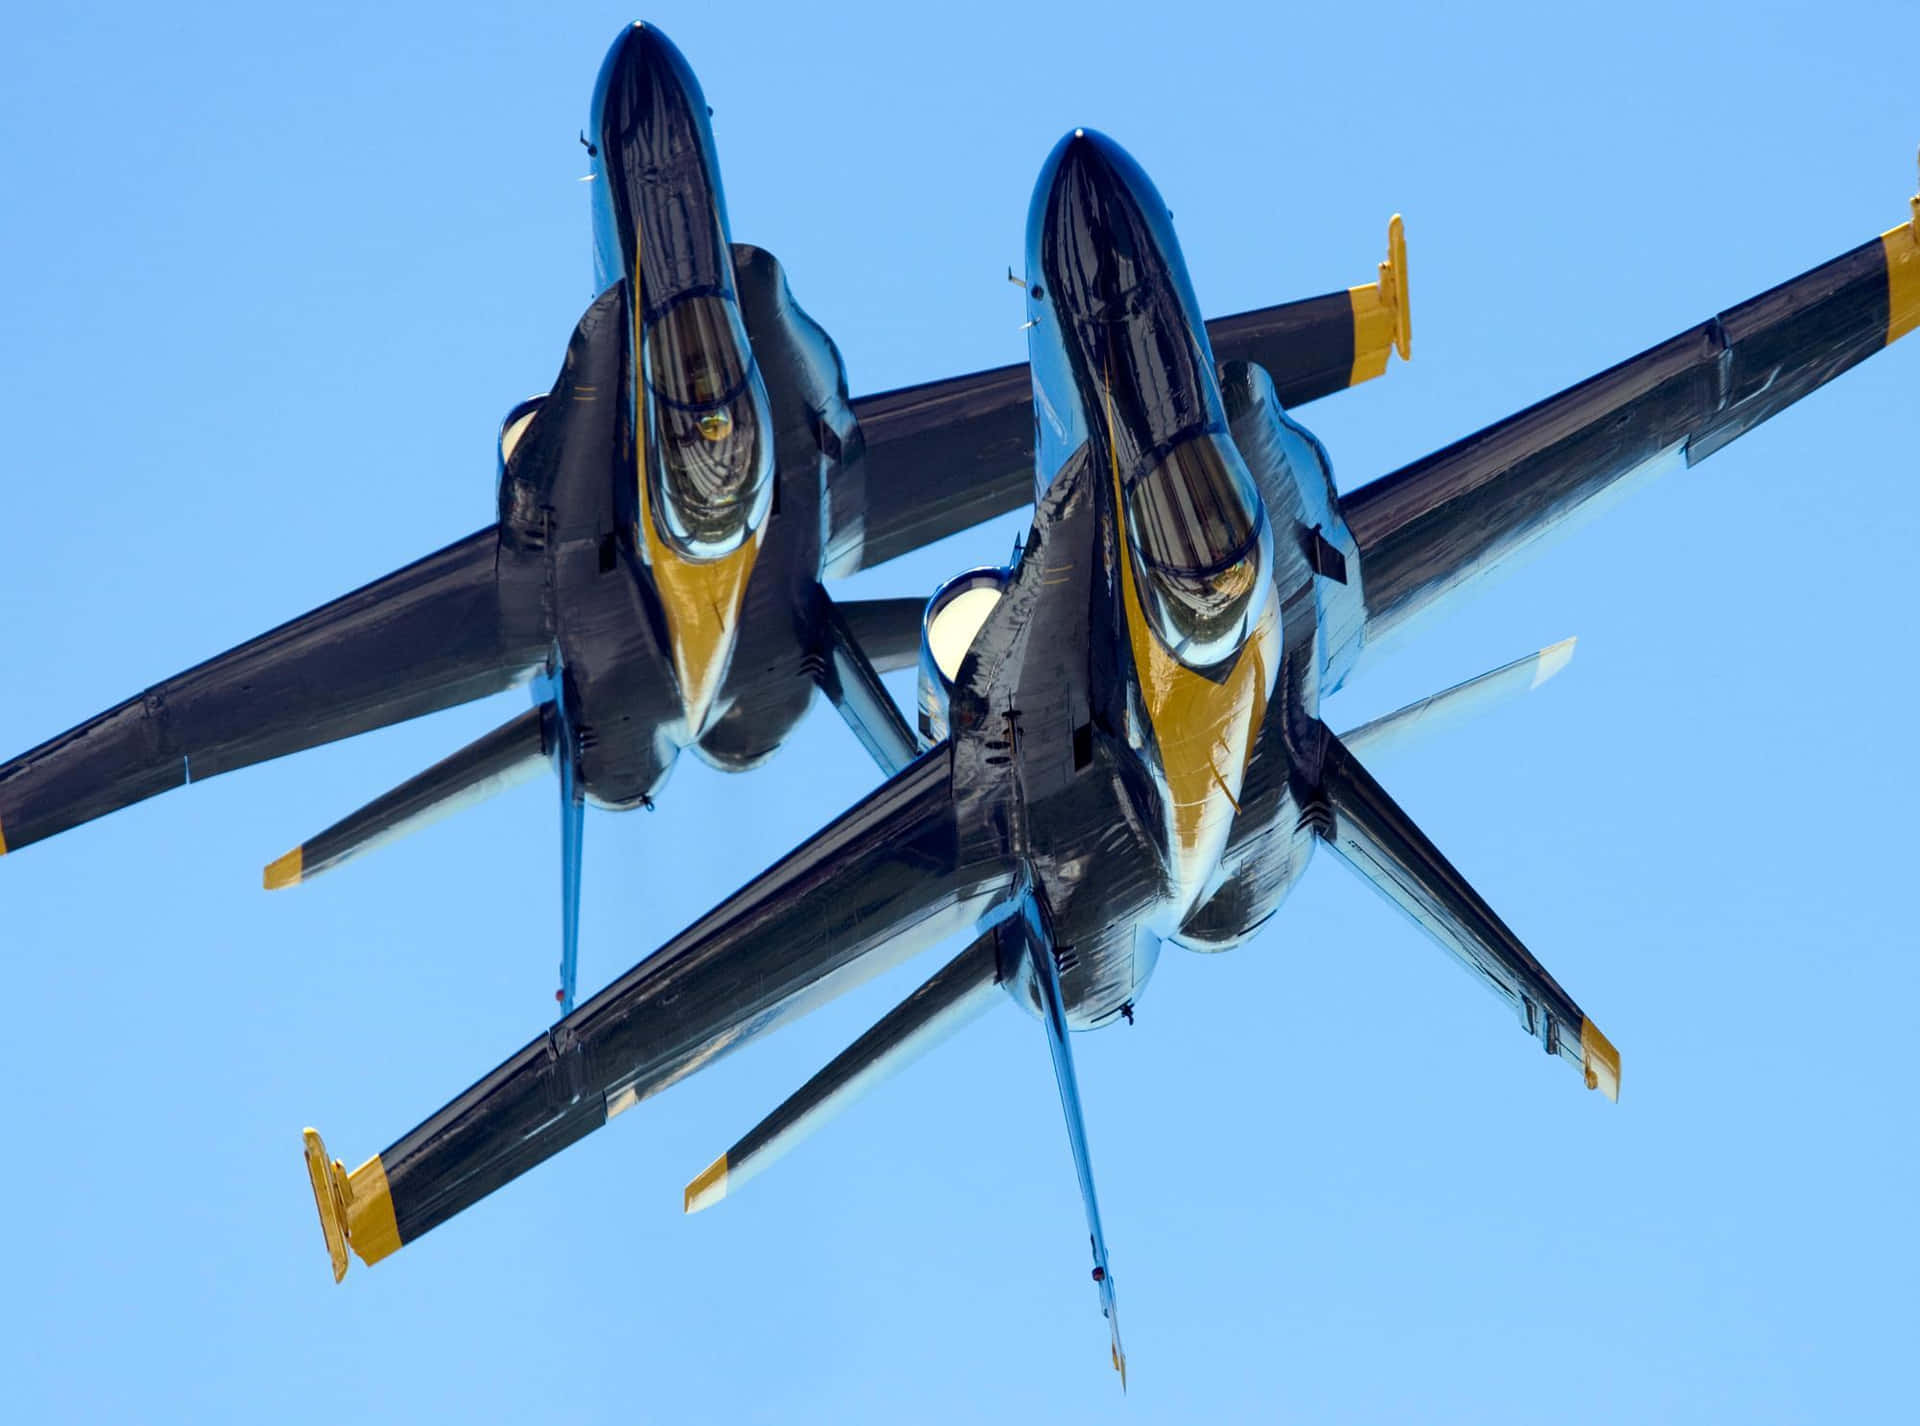 An aerial demonstration of the U.S. Navy Flight Demonstration Squadron, the Blue Angels. Wallpaper